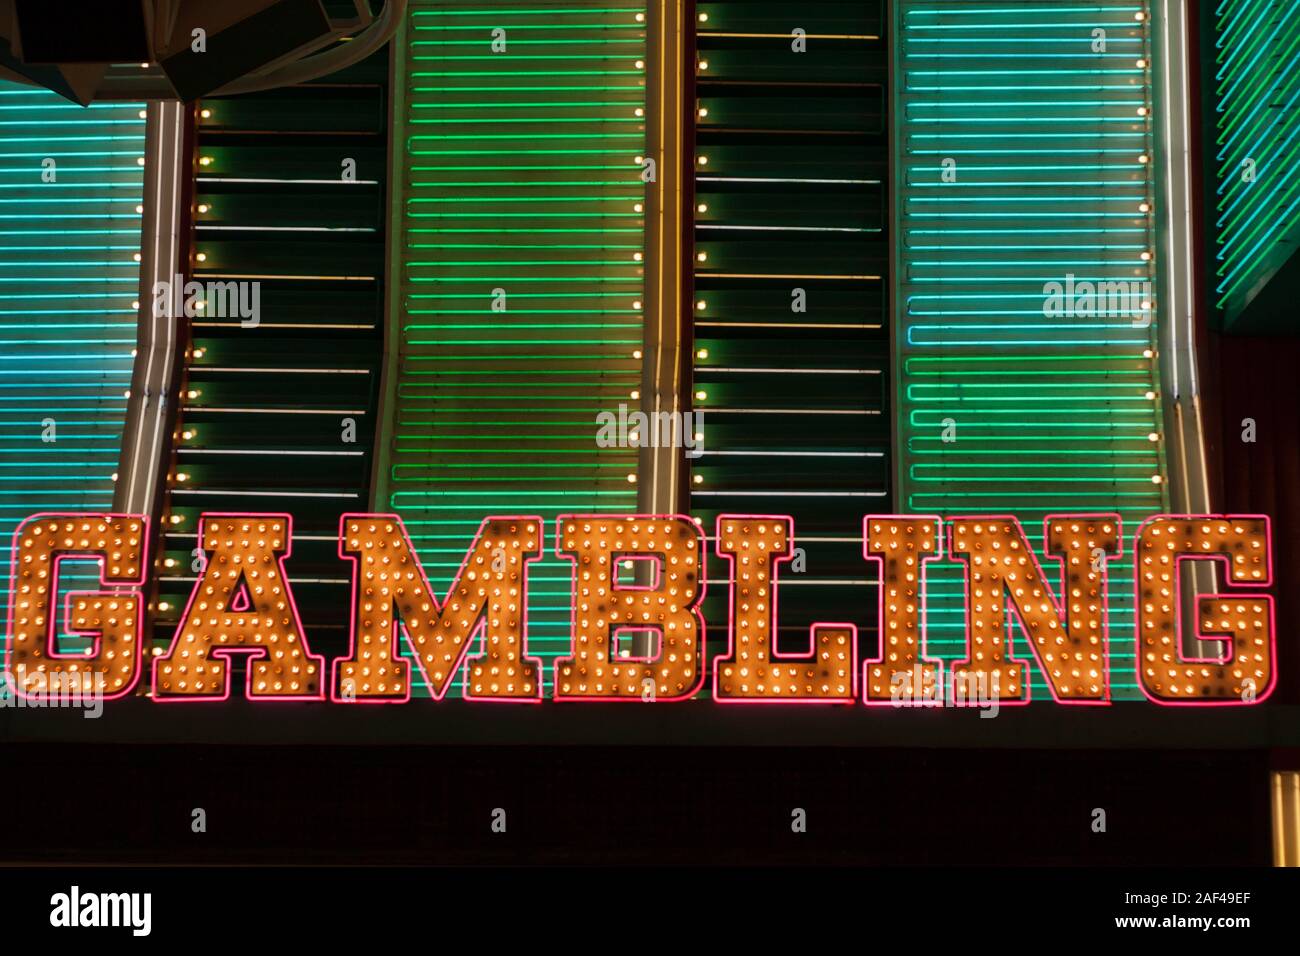 A gambling sign shines brightly outside a casino. Stock Photo